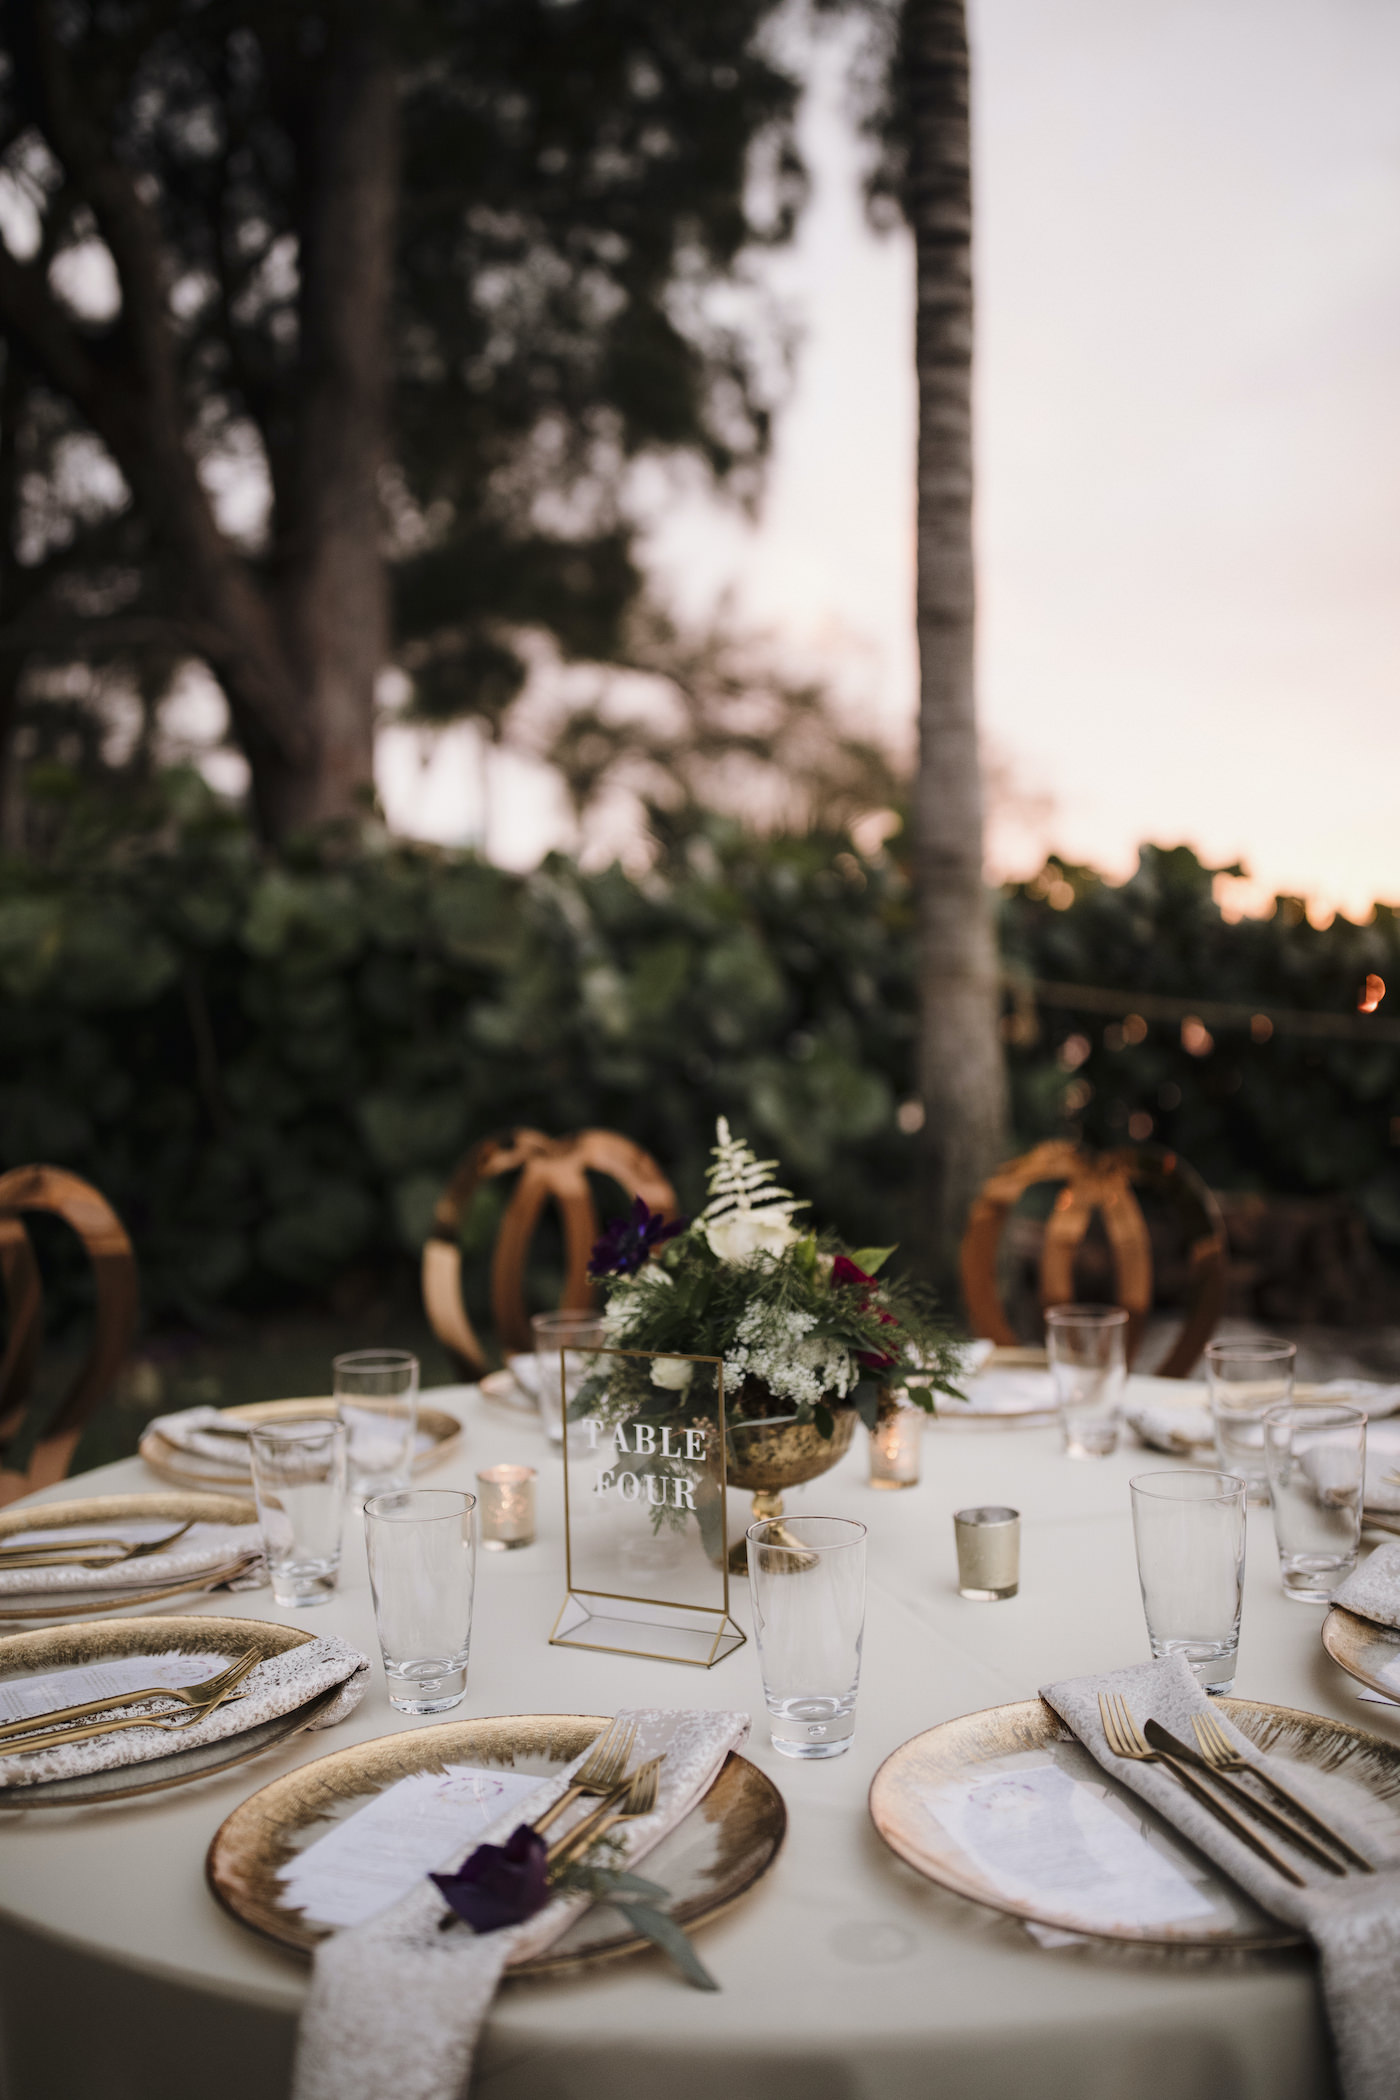 Outdoor Sarasota Beach Neutral Gold and Champagne Wedding Reception Table with Gold Glass Charger Plates and Gold Flatware and Gold King Louis Chairs | Gold Geometric Glass Frame Table Number | Gold Compote Vase Wedding Centerpiece with White and Red Flowers and Greenery